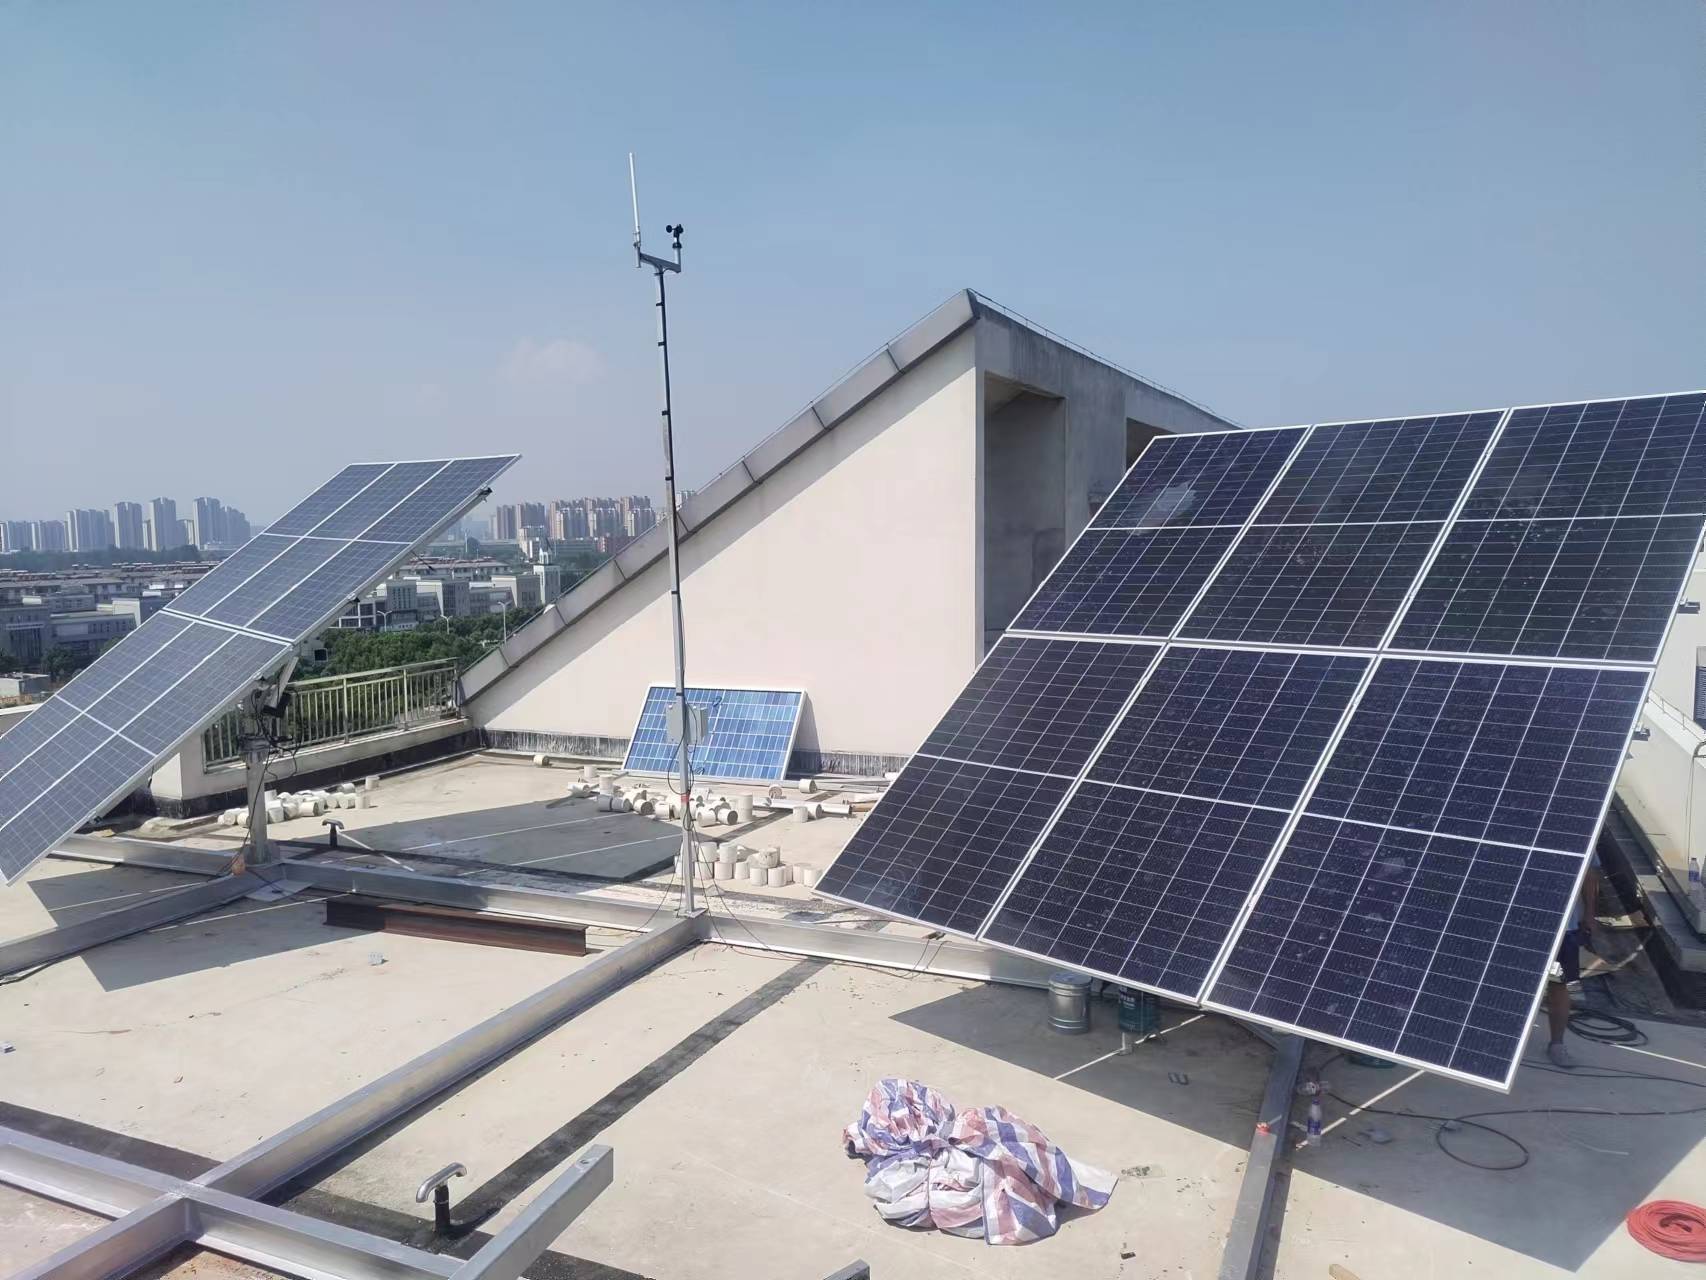 Advantages and applicable scenarios of flat single-axis tracking photovoltaic mounts for roofs